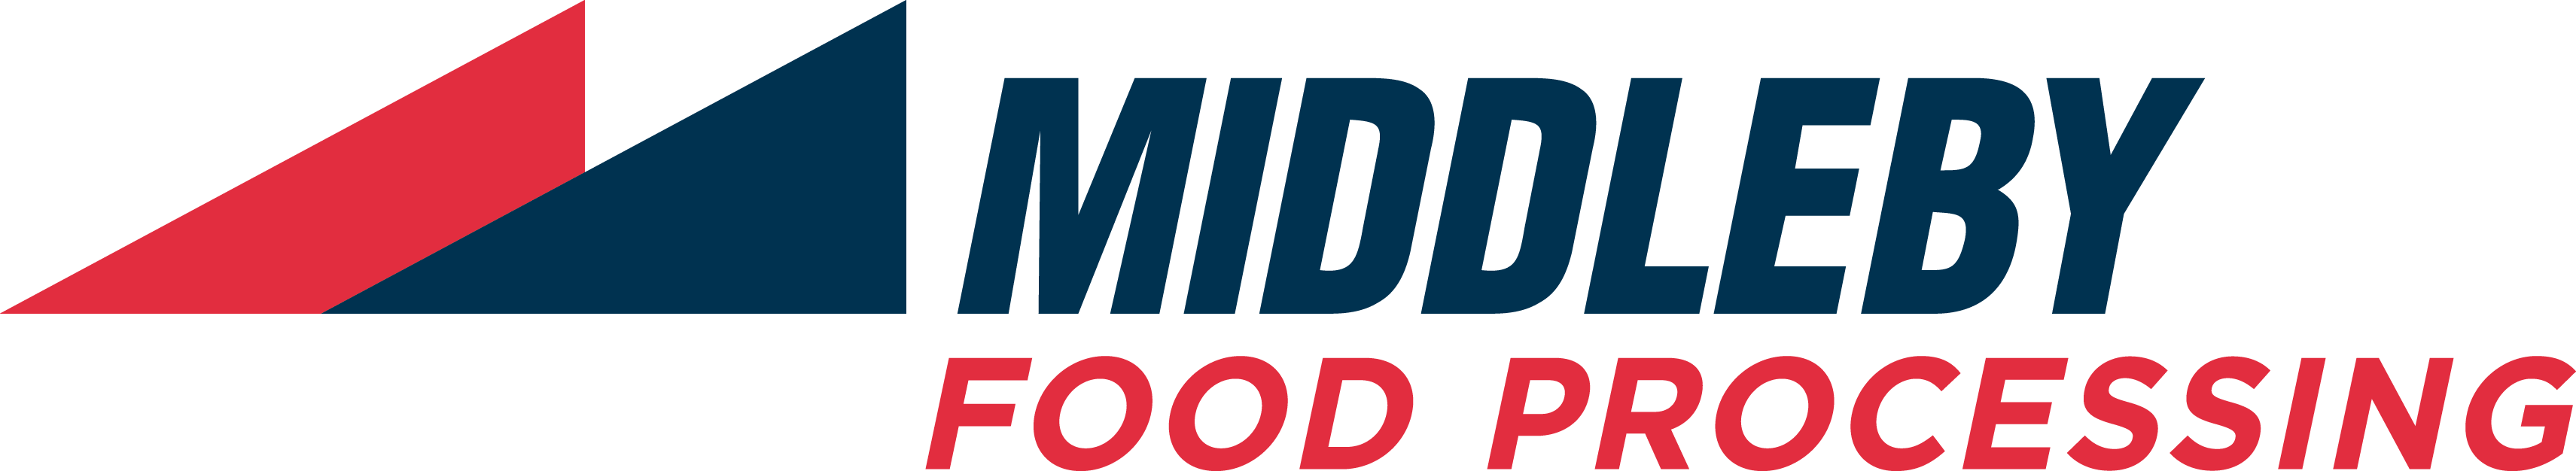 MiddlebyFood Processing